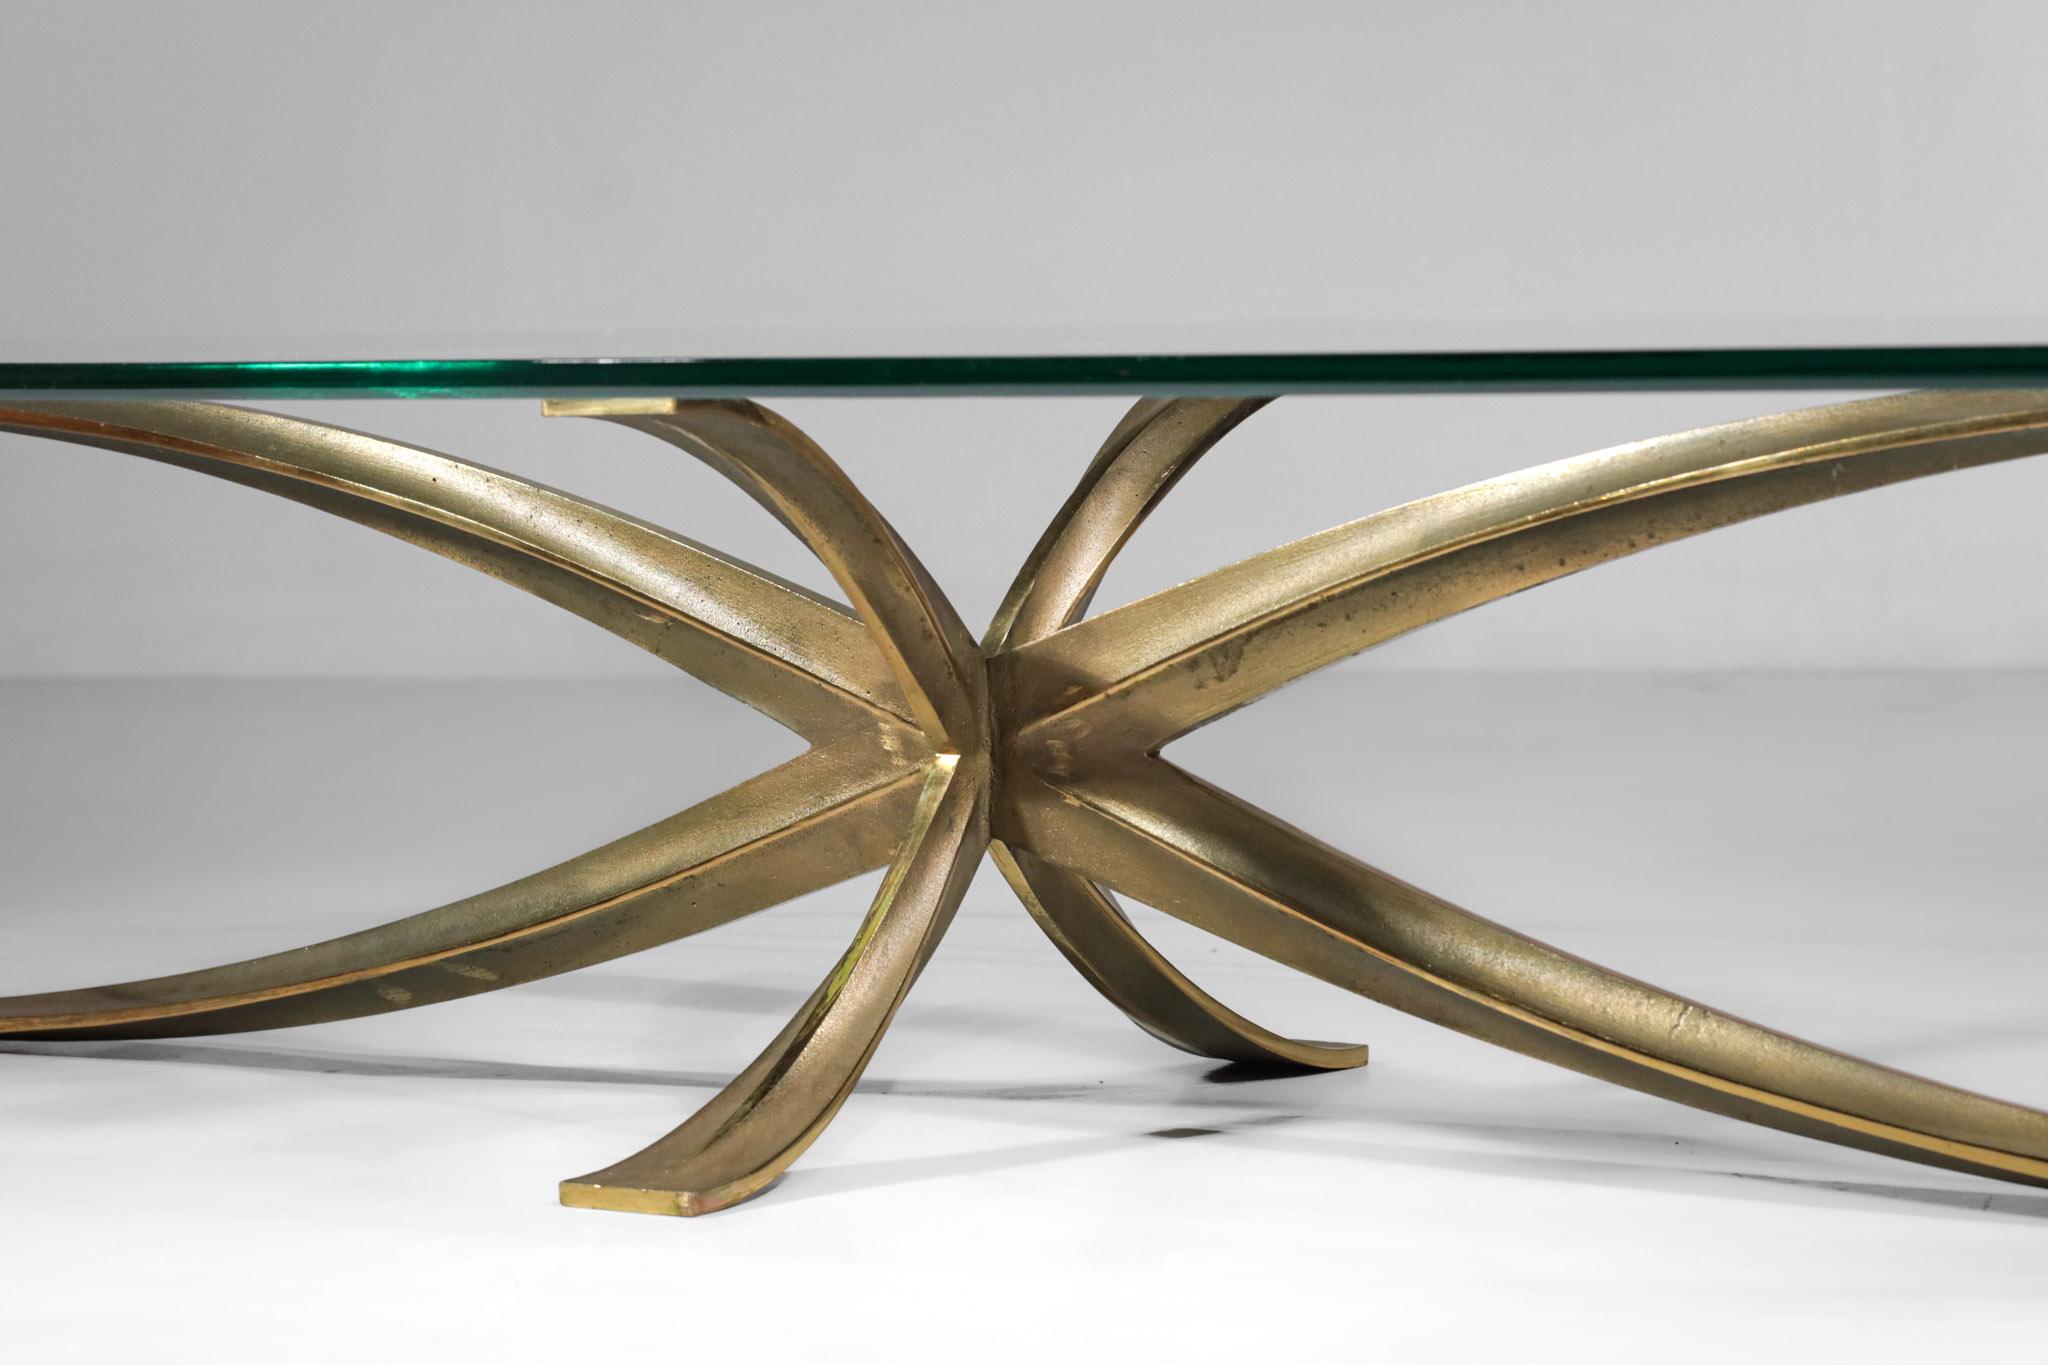 Large Michel Mangematin Coffee Table in Gilt Bronze and Oval Glass 1960's Design For Sale 6